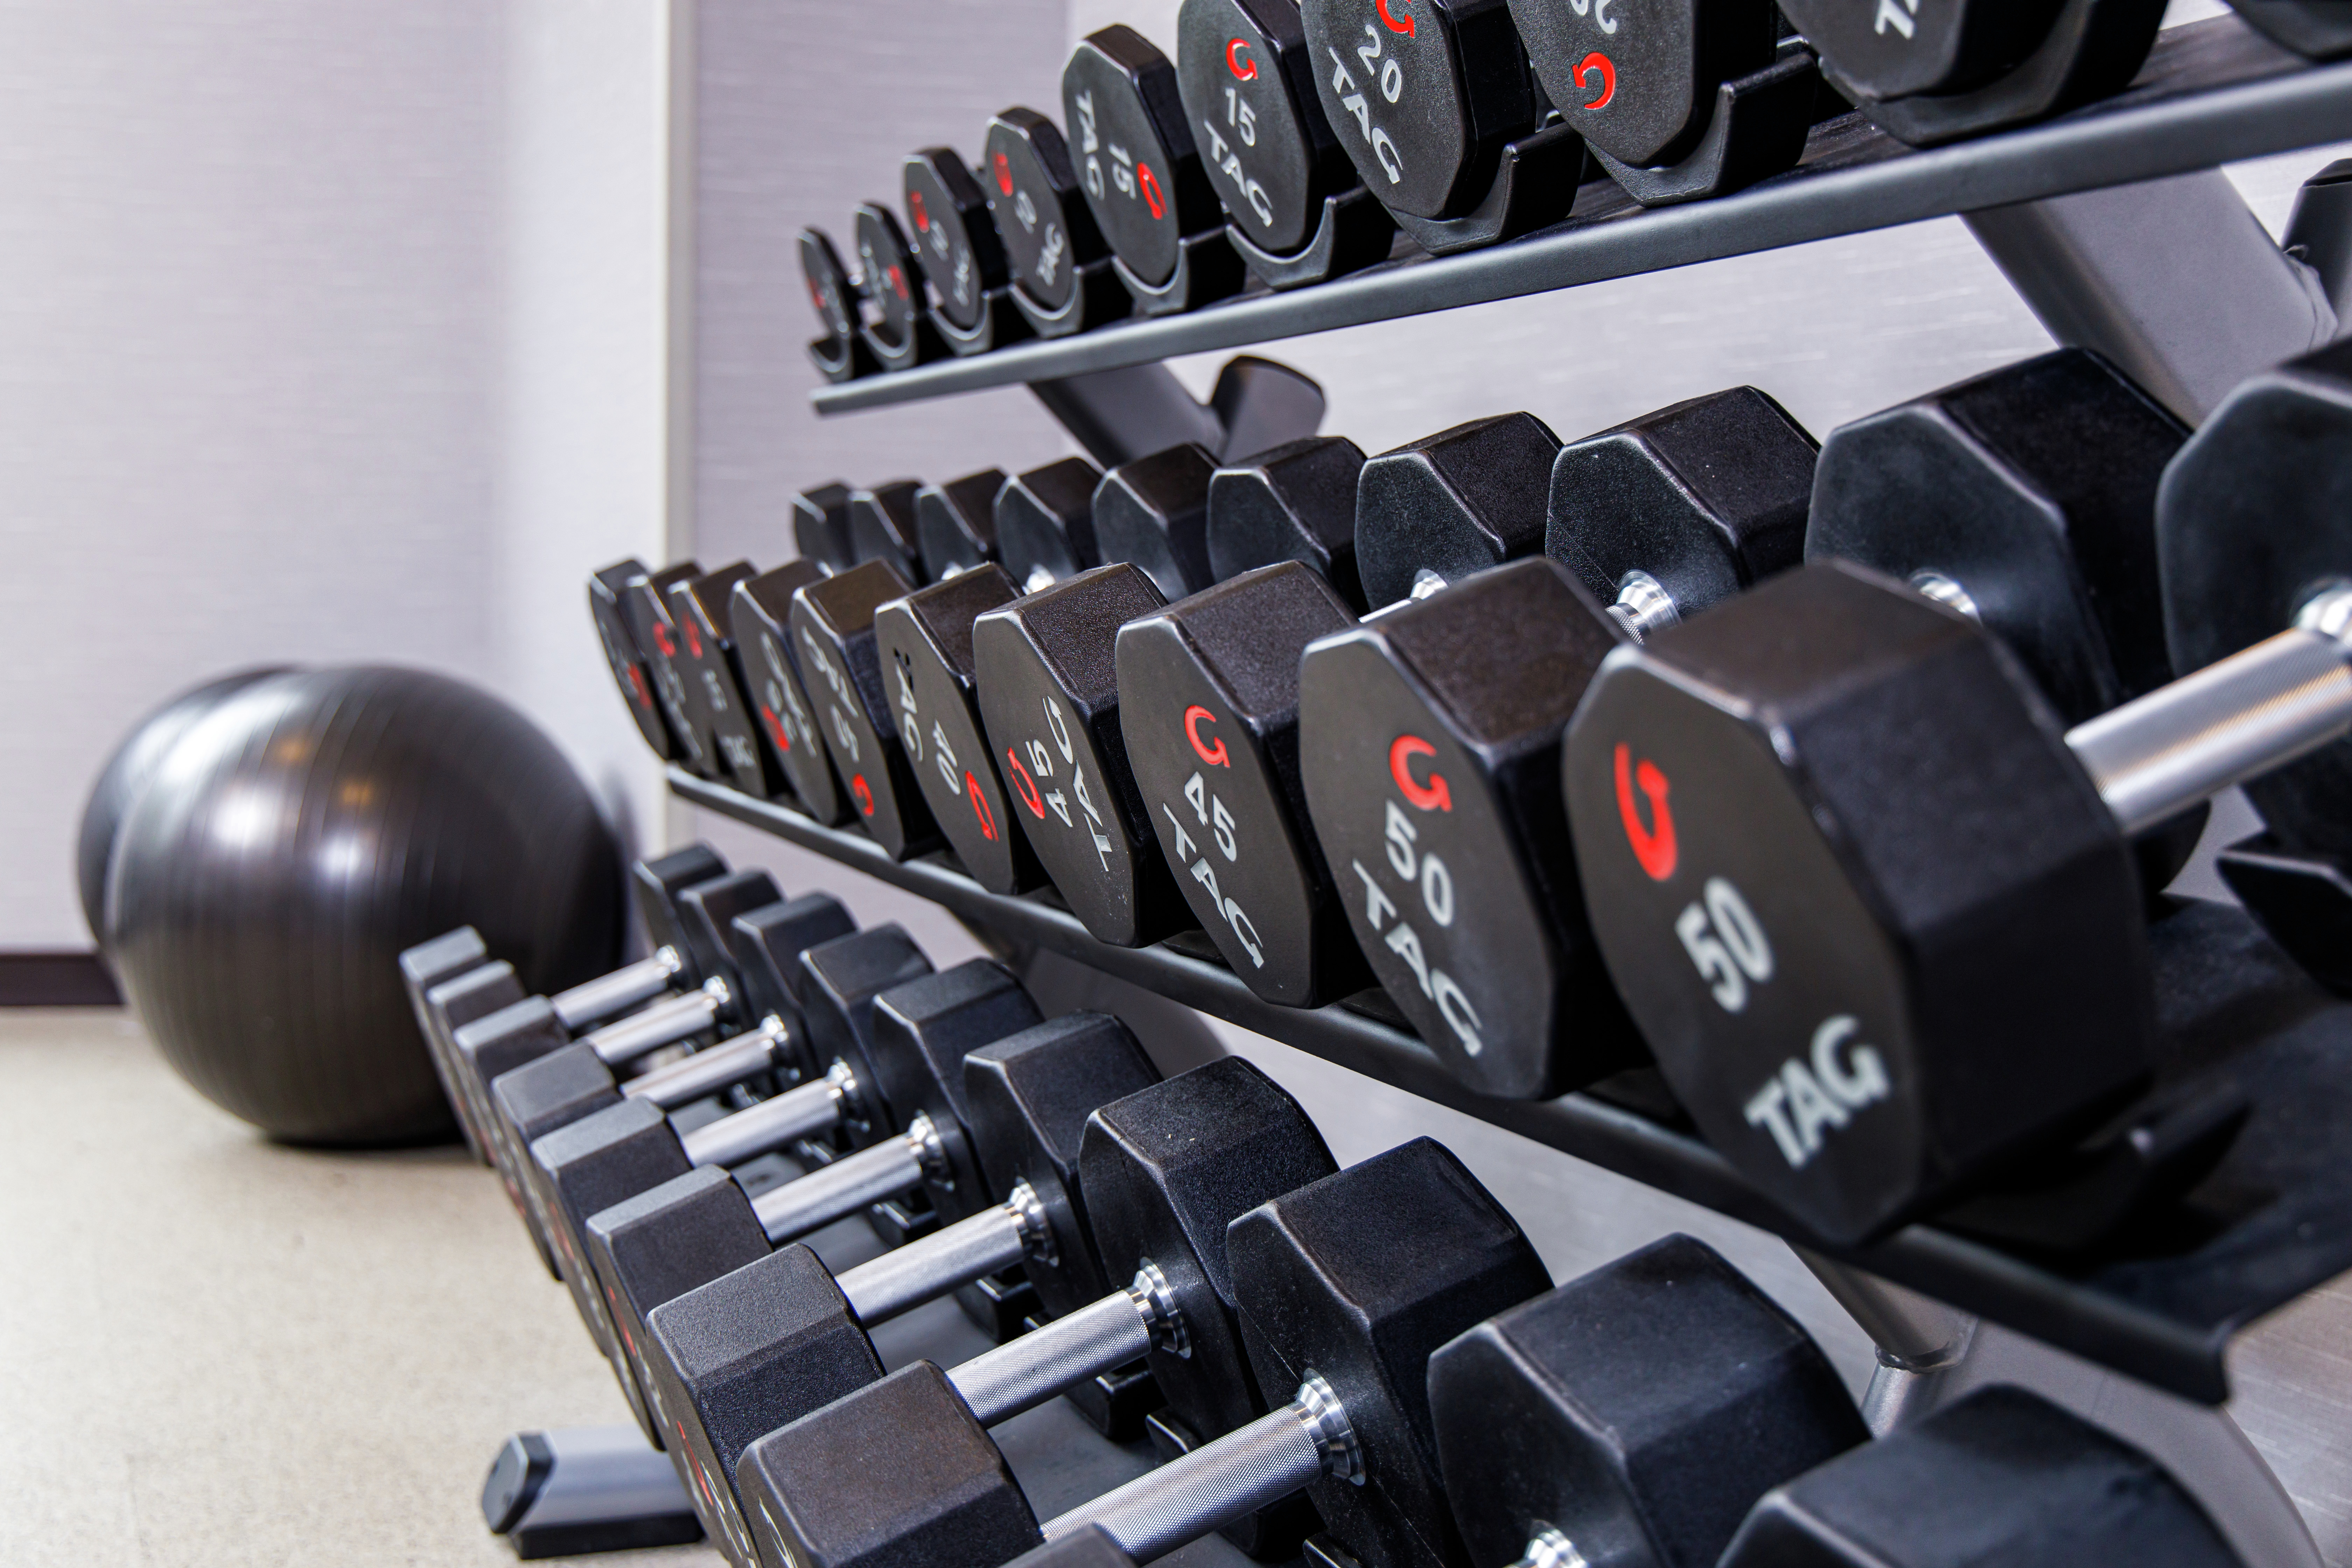 Fitness Center, Free Weights